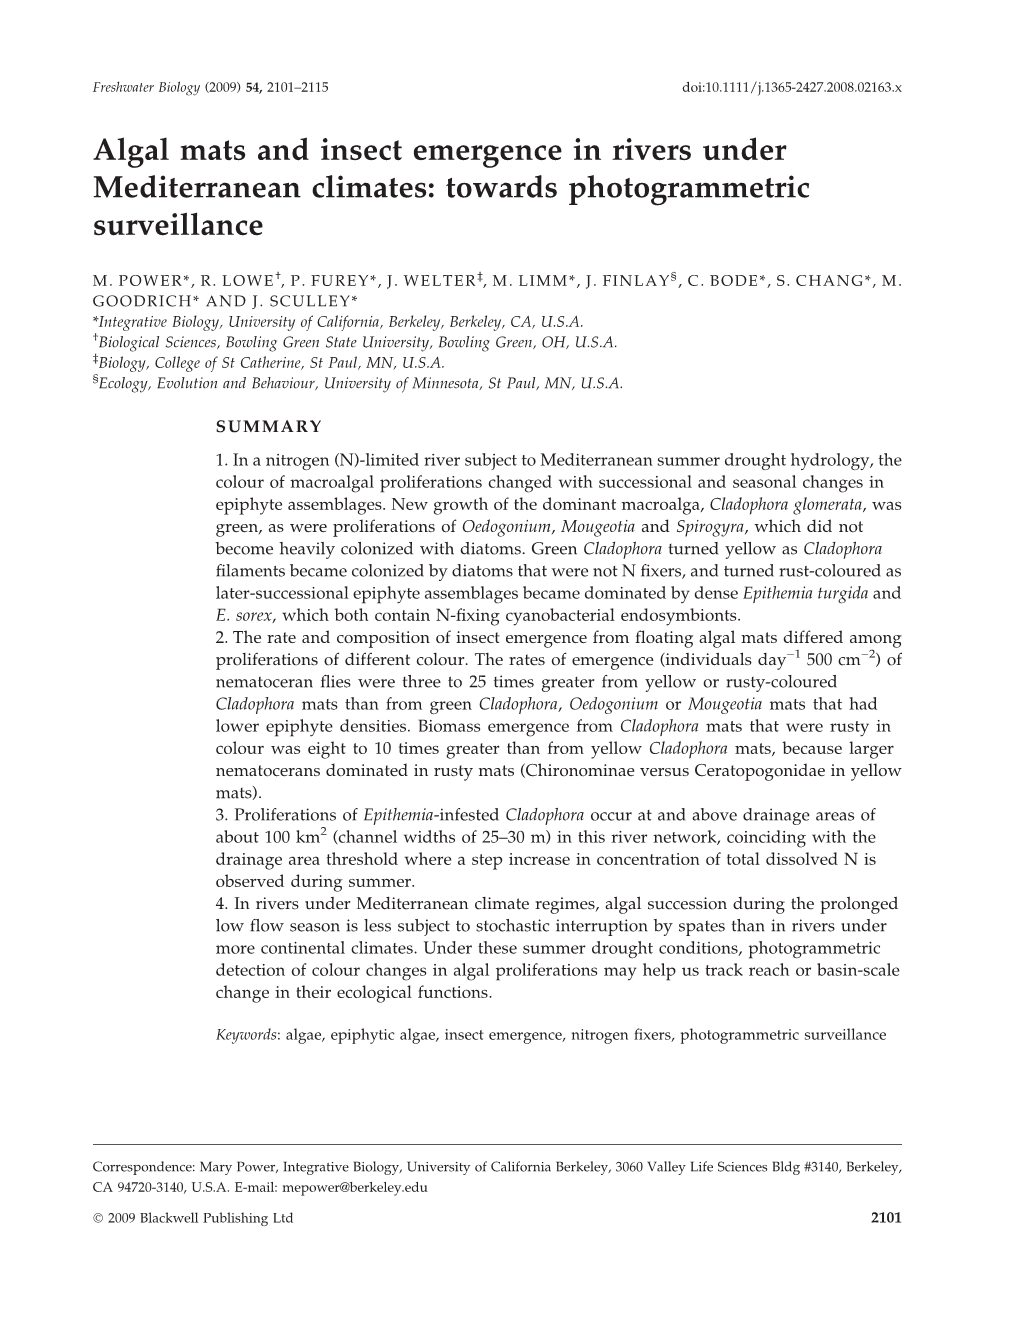 Algal Mats and Insect Emergence in Rivers Under Mediterranean Climates: Towards Photogrammetric Surveillance